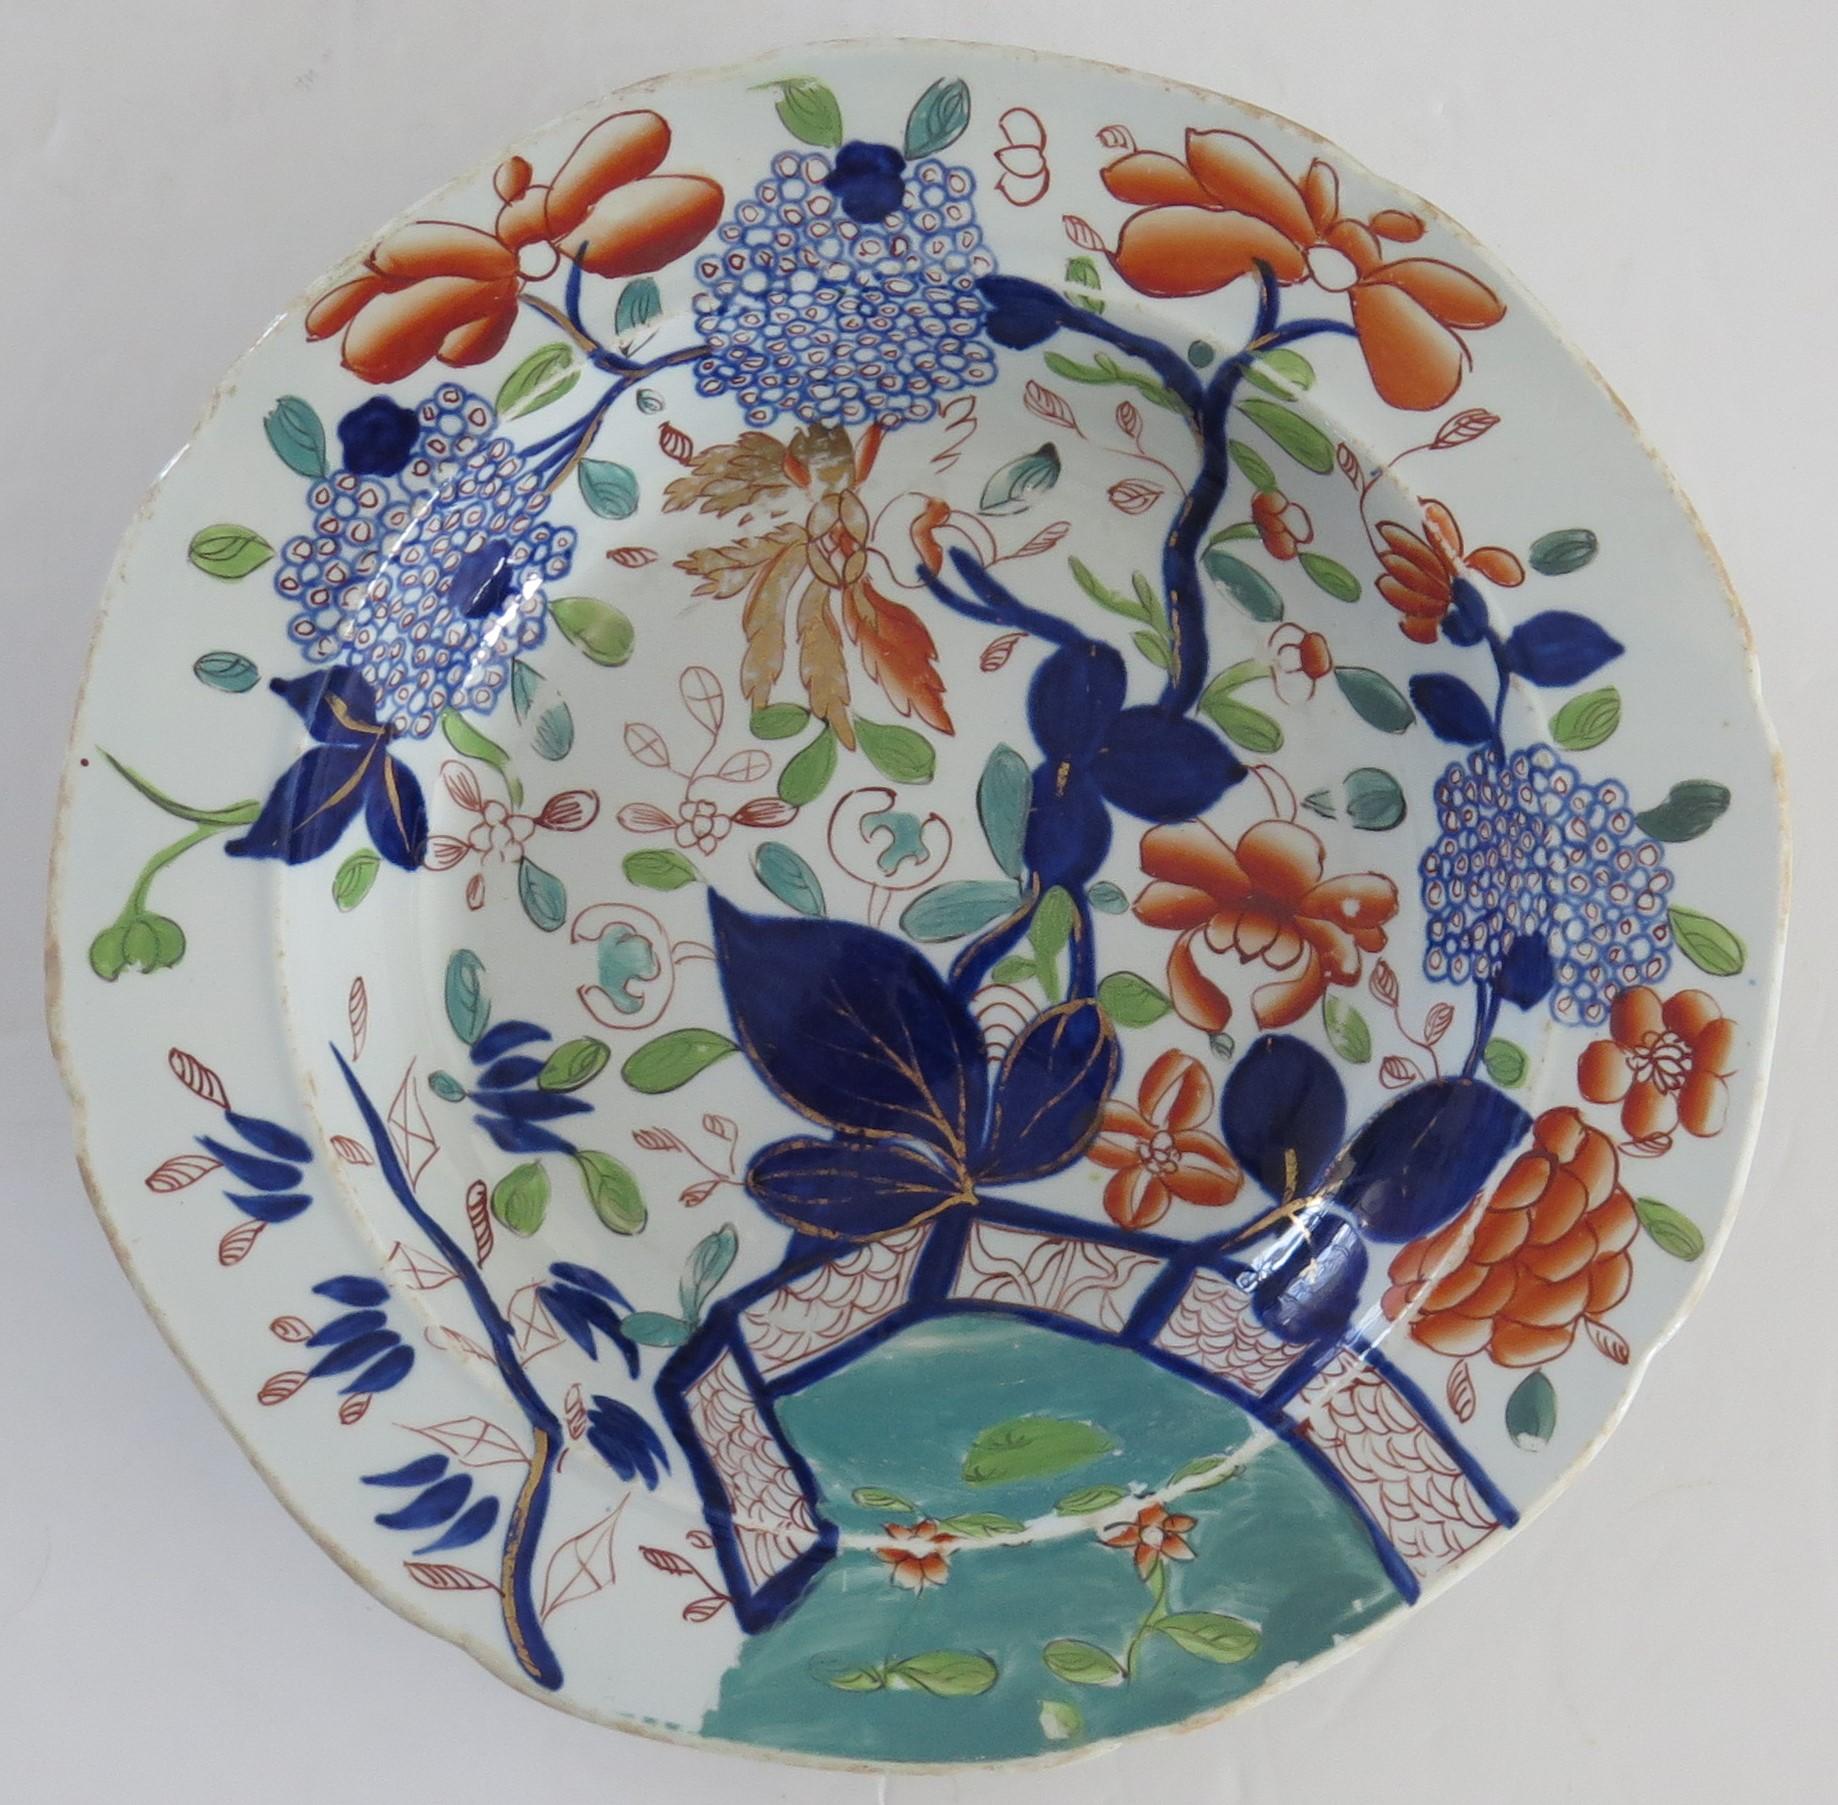 This is a very good early Mason's ironstone pottery soup bowl or deep plate hand painted in the Fence, Blue Leaf & Lilac pattern,  produced by the Mason's factory at Lane Delph, Staffordshire, England, circa 1813-1820.

The plate is circular with a